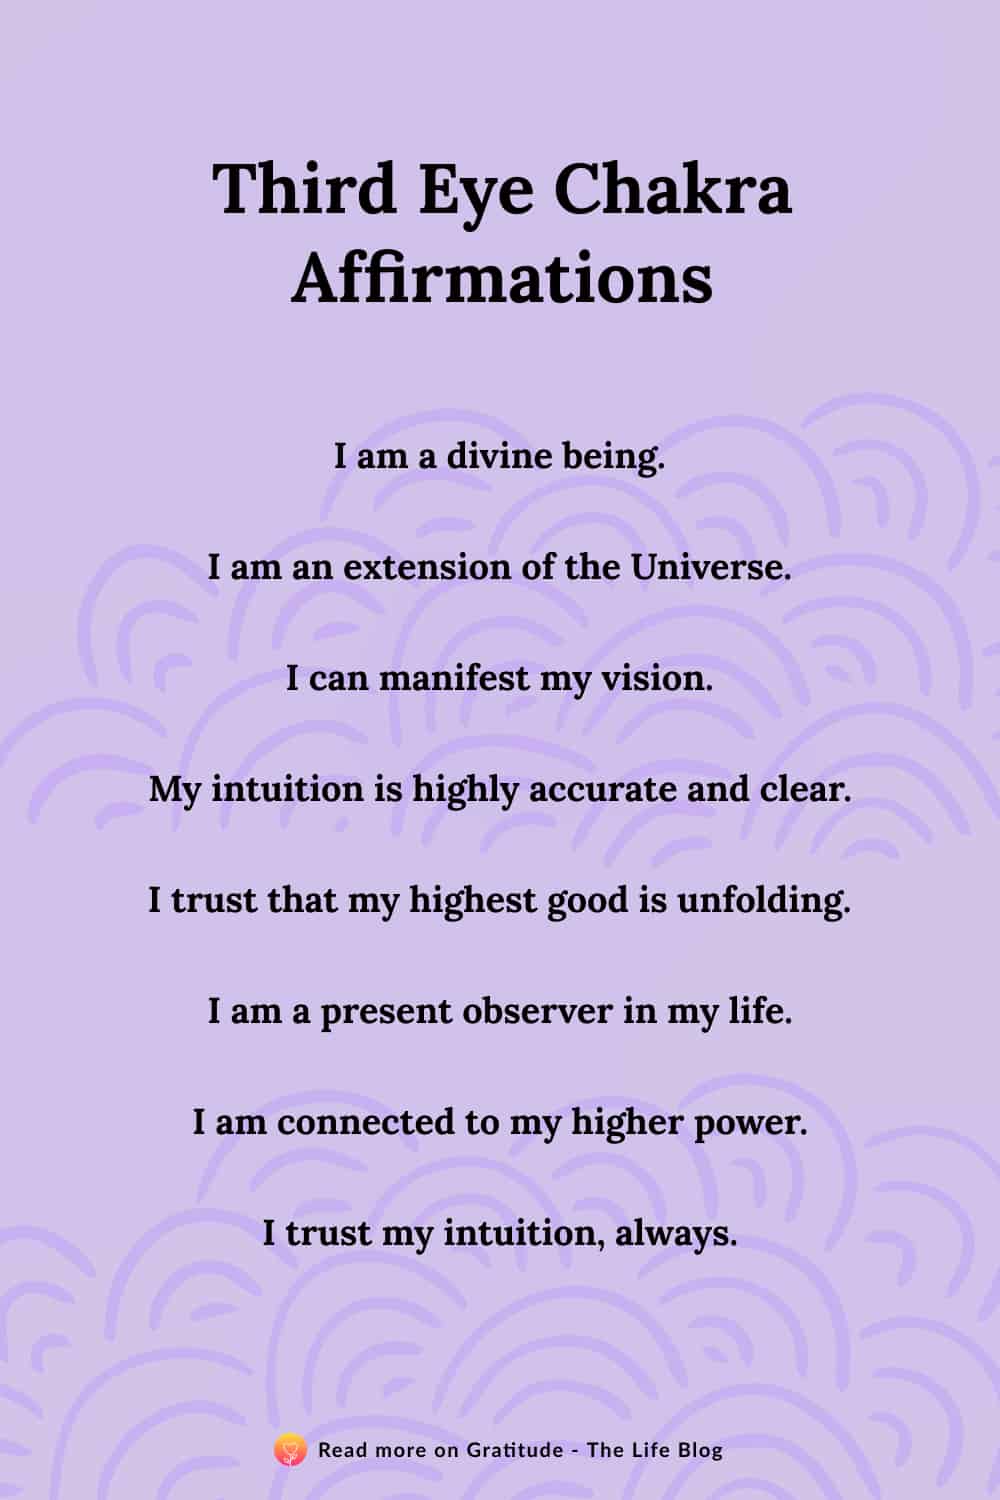 Image with list of third eye chakra affirmations